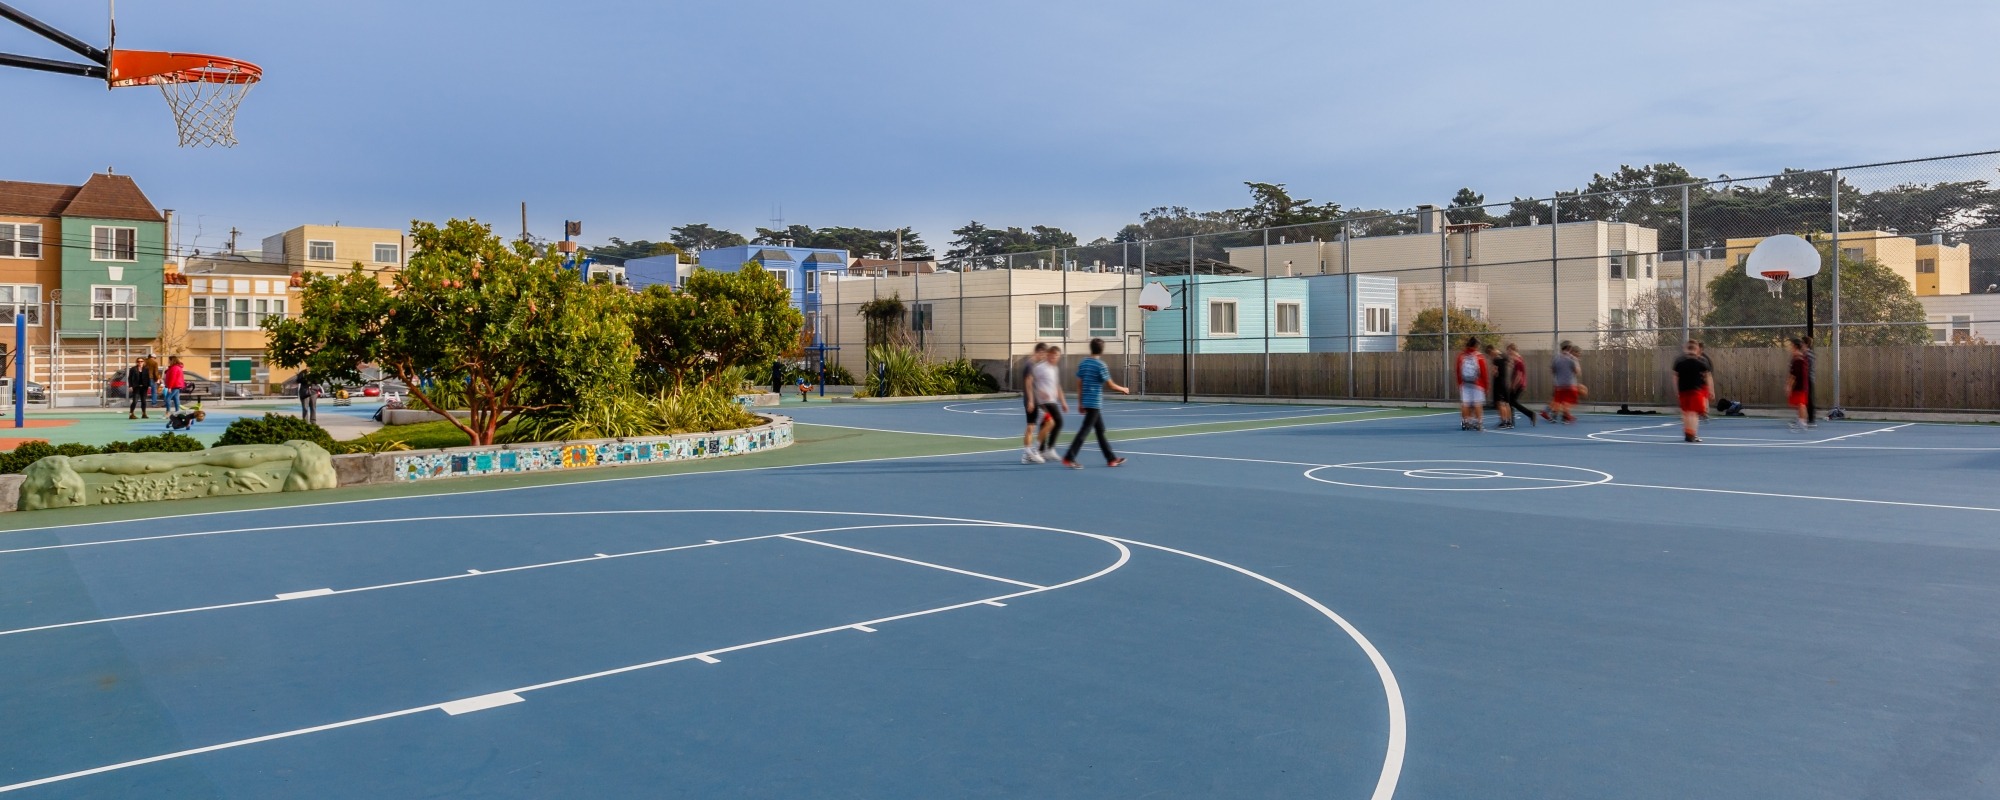 Cabrillo Playground and Clubhouse